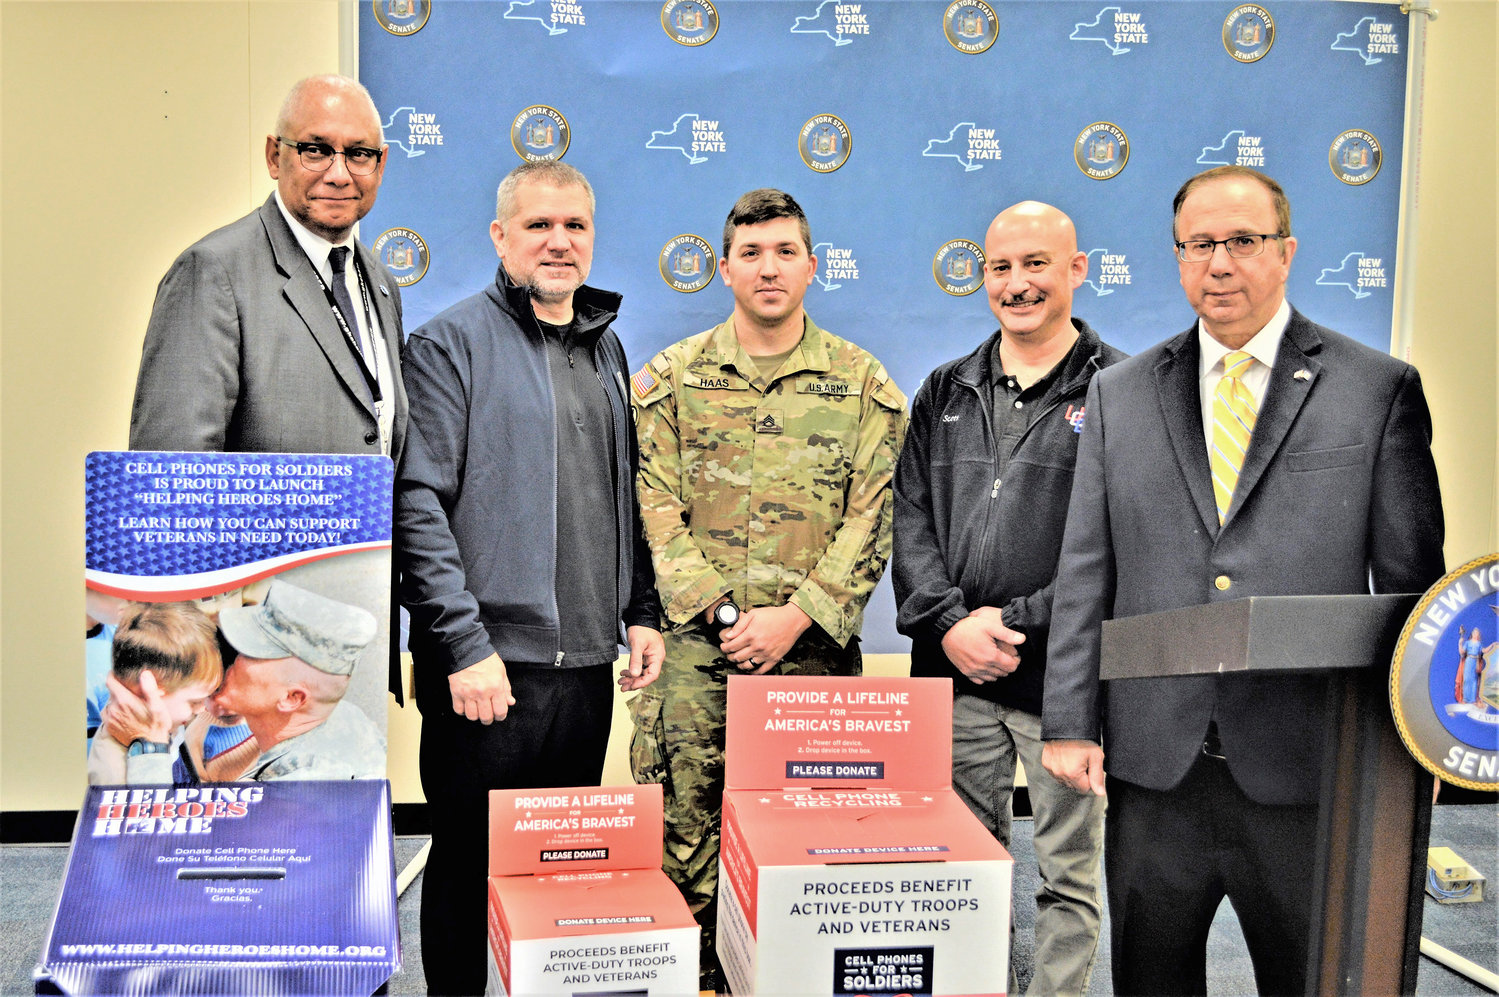 New York State Sen. Joseph Griffo, R-I-C-Rome, was joined by AT&amp;T, Army National Guard SSG. Charles Haas, the Central New York Veterans Outreach Center and the Utica Comets to kick off this year's Cell Phones For Soldiers collection drive. Beginning Thursday, Nov. 11 and going until Saturday, Dec. 11, residents of the 47th Senate District can drop off unused or unwanted cell phones at several locations. For every donated phone, mobile device or tablet valued at $5, Cell Phones For Soldiers provides 2.5 hours of free talk time to deployed troops via calling cards. Pictured, from left to right: Greeley Ford with AT&amp;T, Rick Redmond, senior vice president of facility operations at the Adirondack Bank Center, SSG. Haas, Scott Zoeckler with the Central New York Veterans Outreach Center and Sen. Griffo.